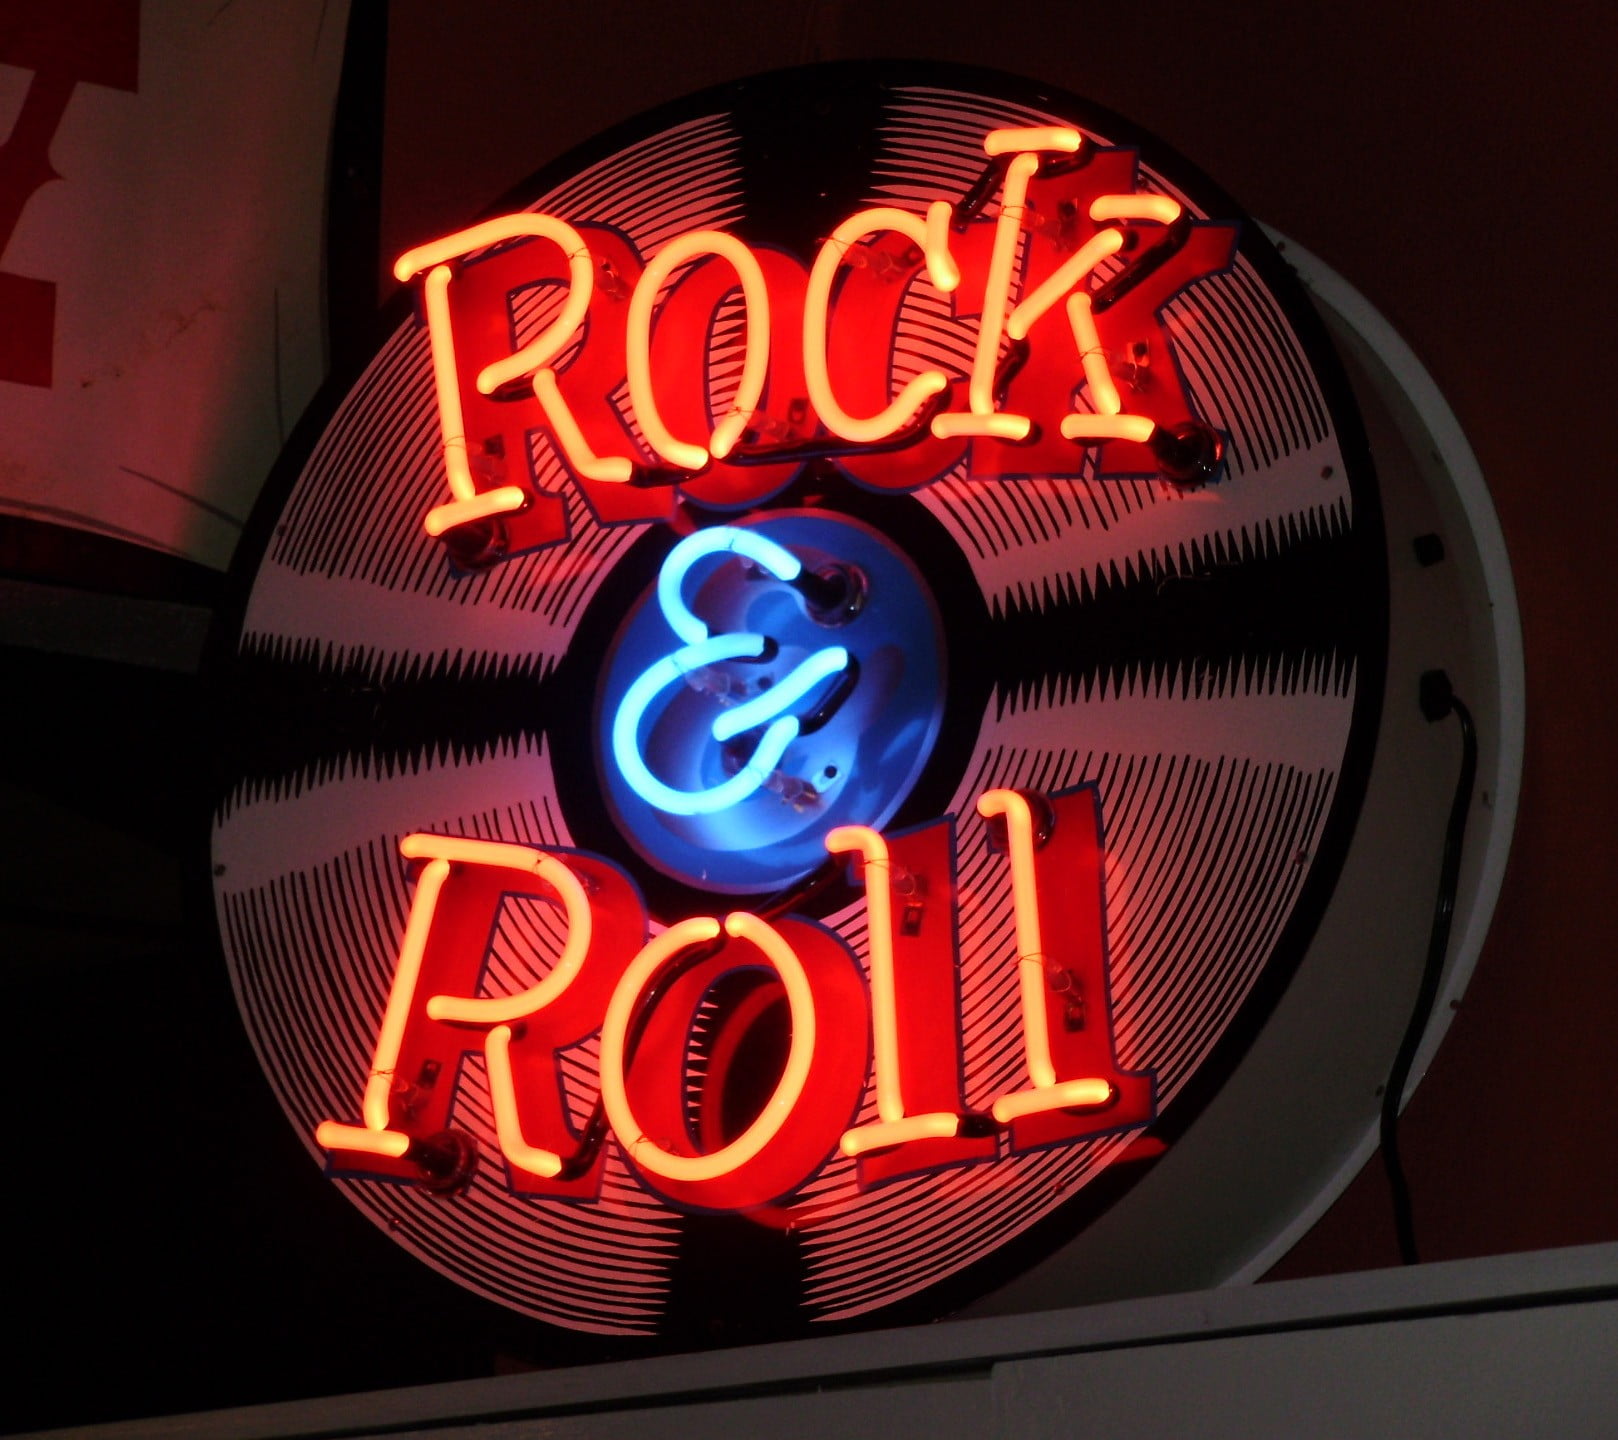 red rock & roll neon light signage, rock & roll, indoors